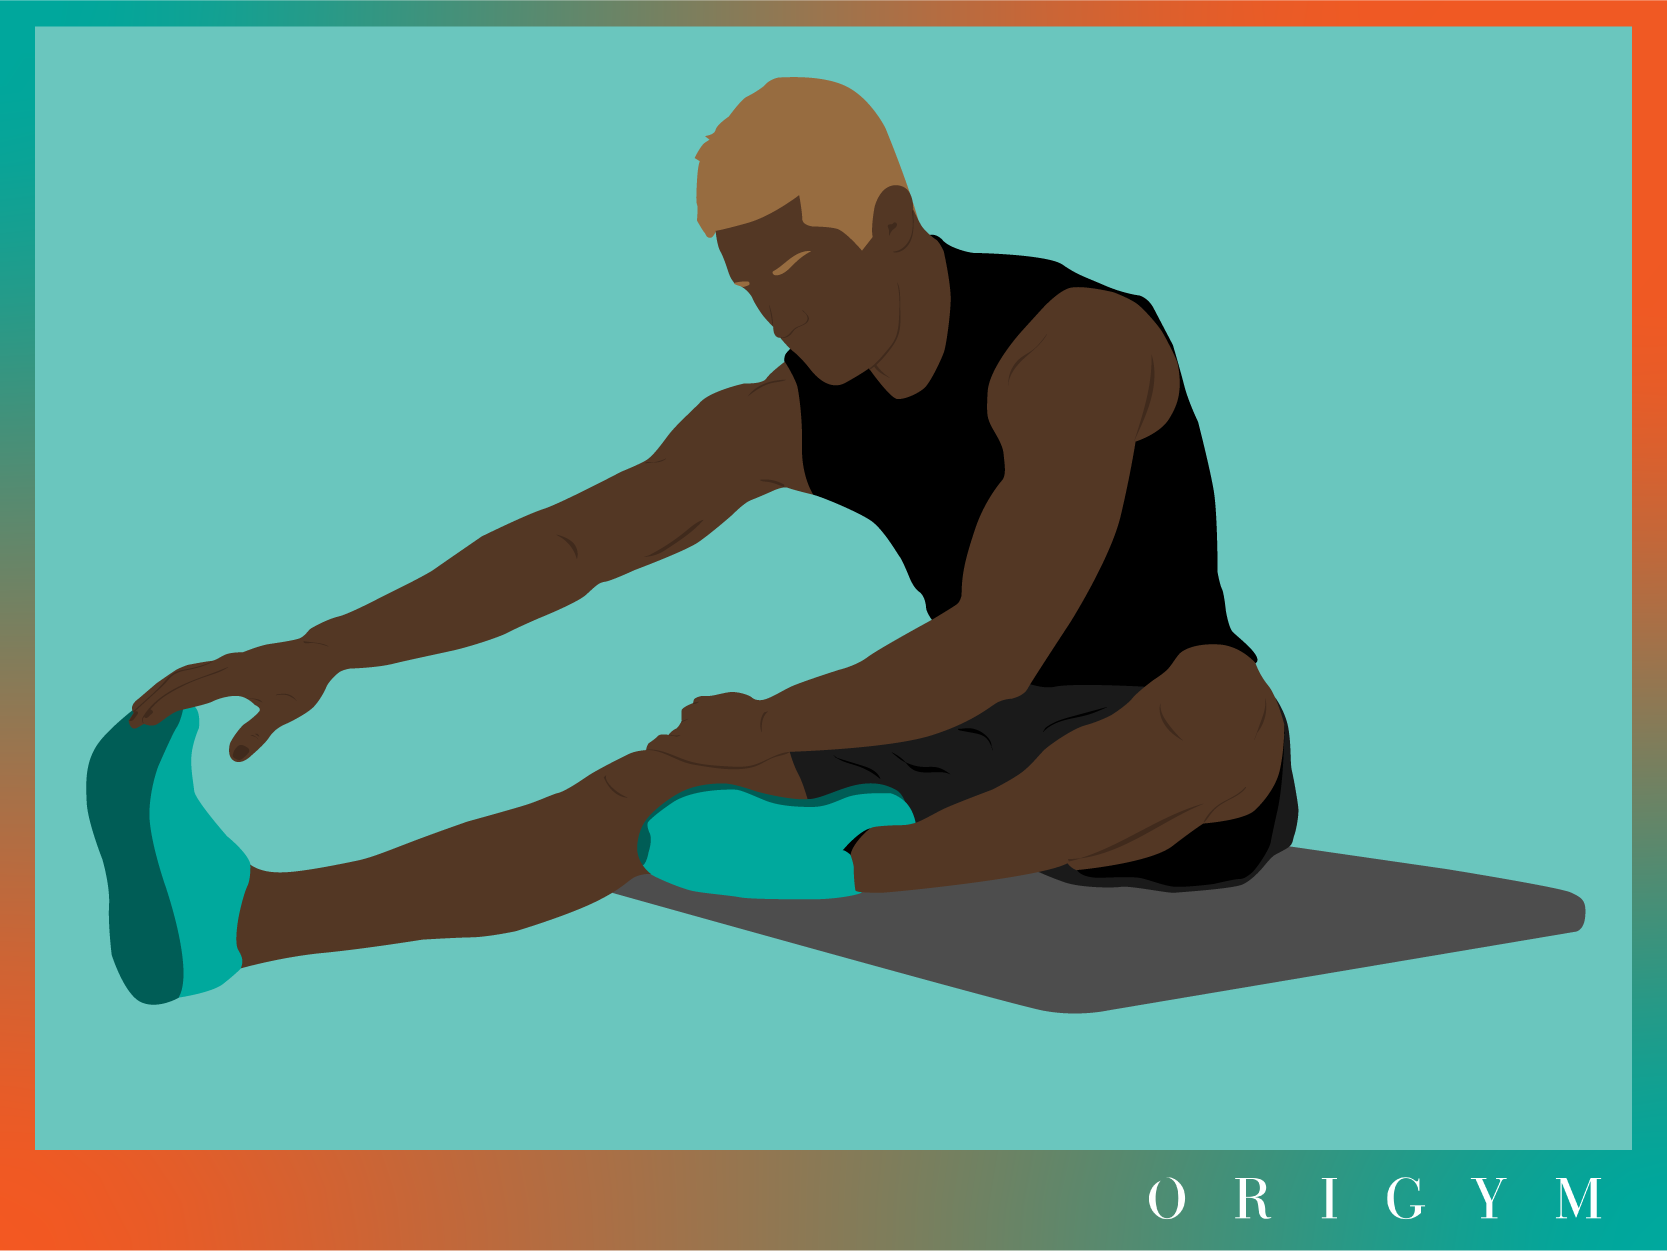 Seated hamstring stretch: A must-try exercise for tight muscles